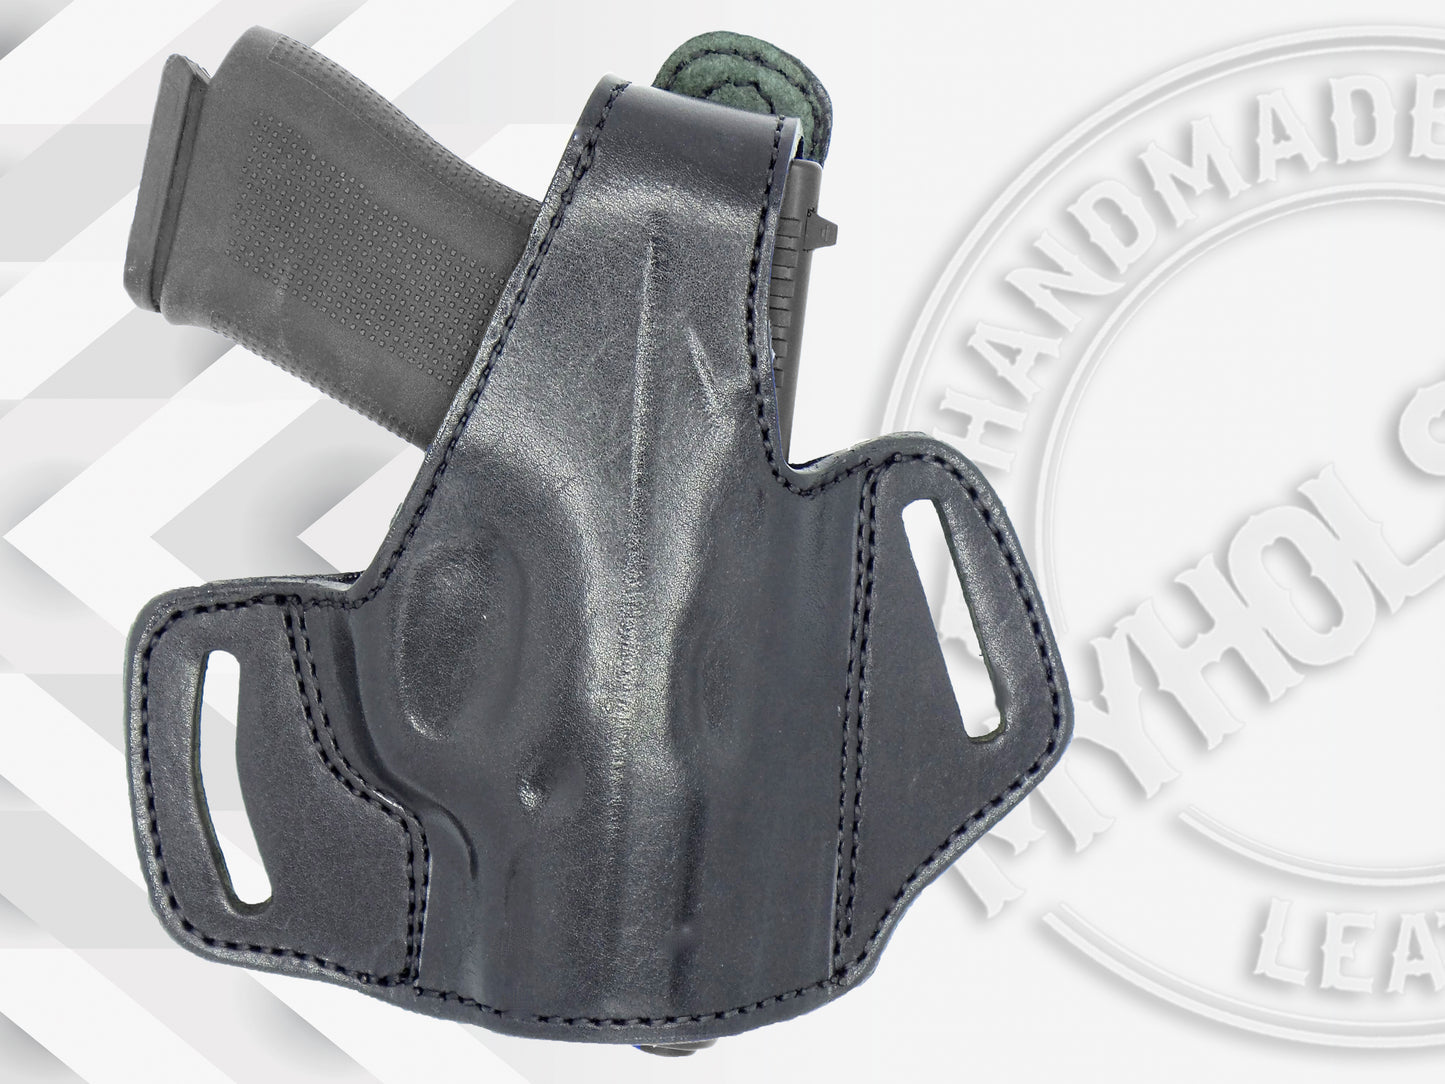 Black Pancake Belt Holster for S&W M&P 40 COMPACT 3.5"